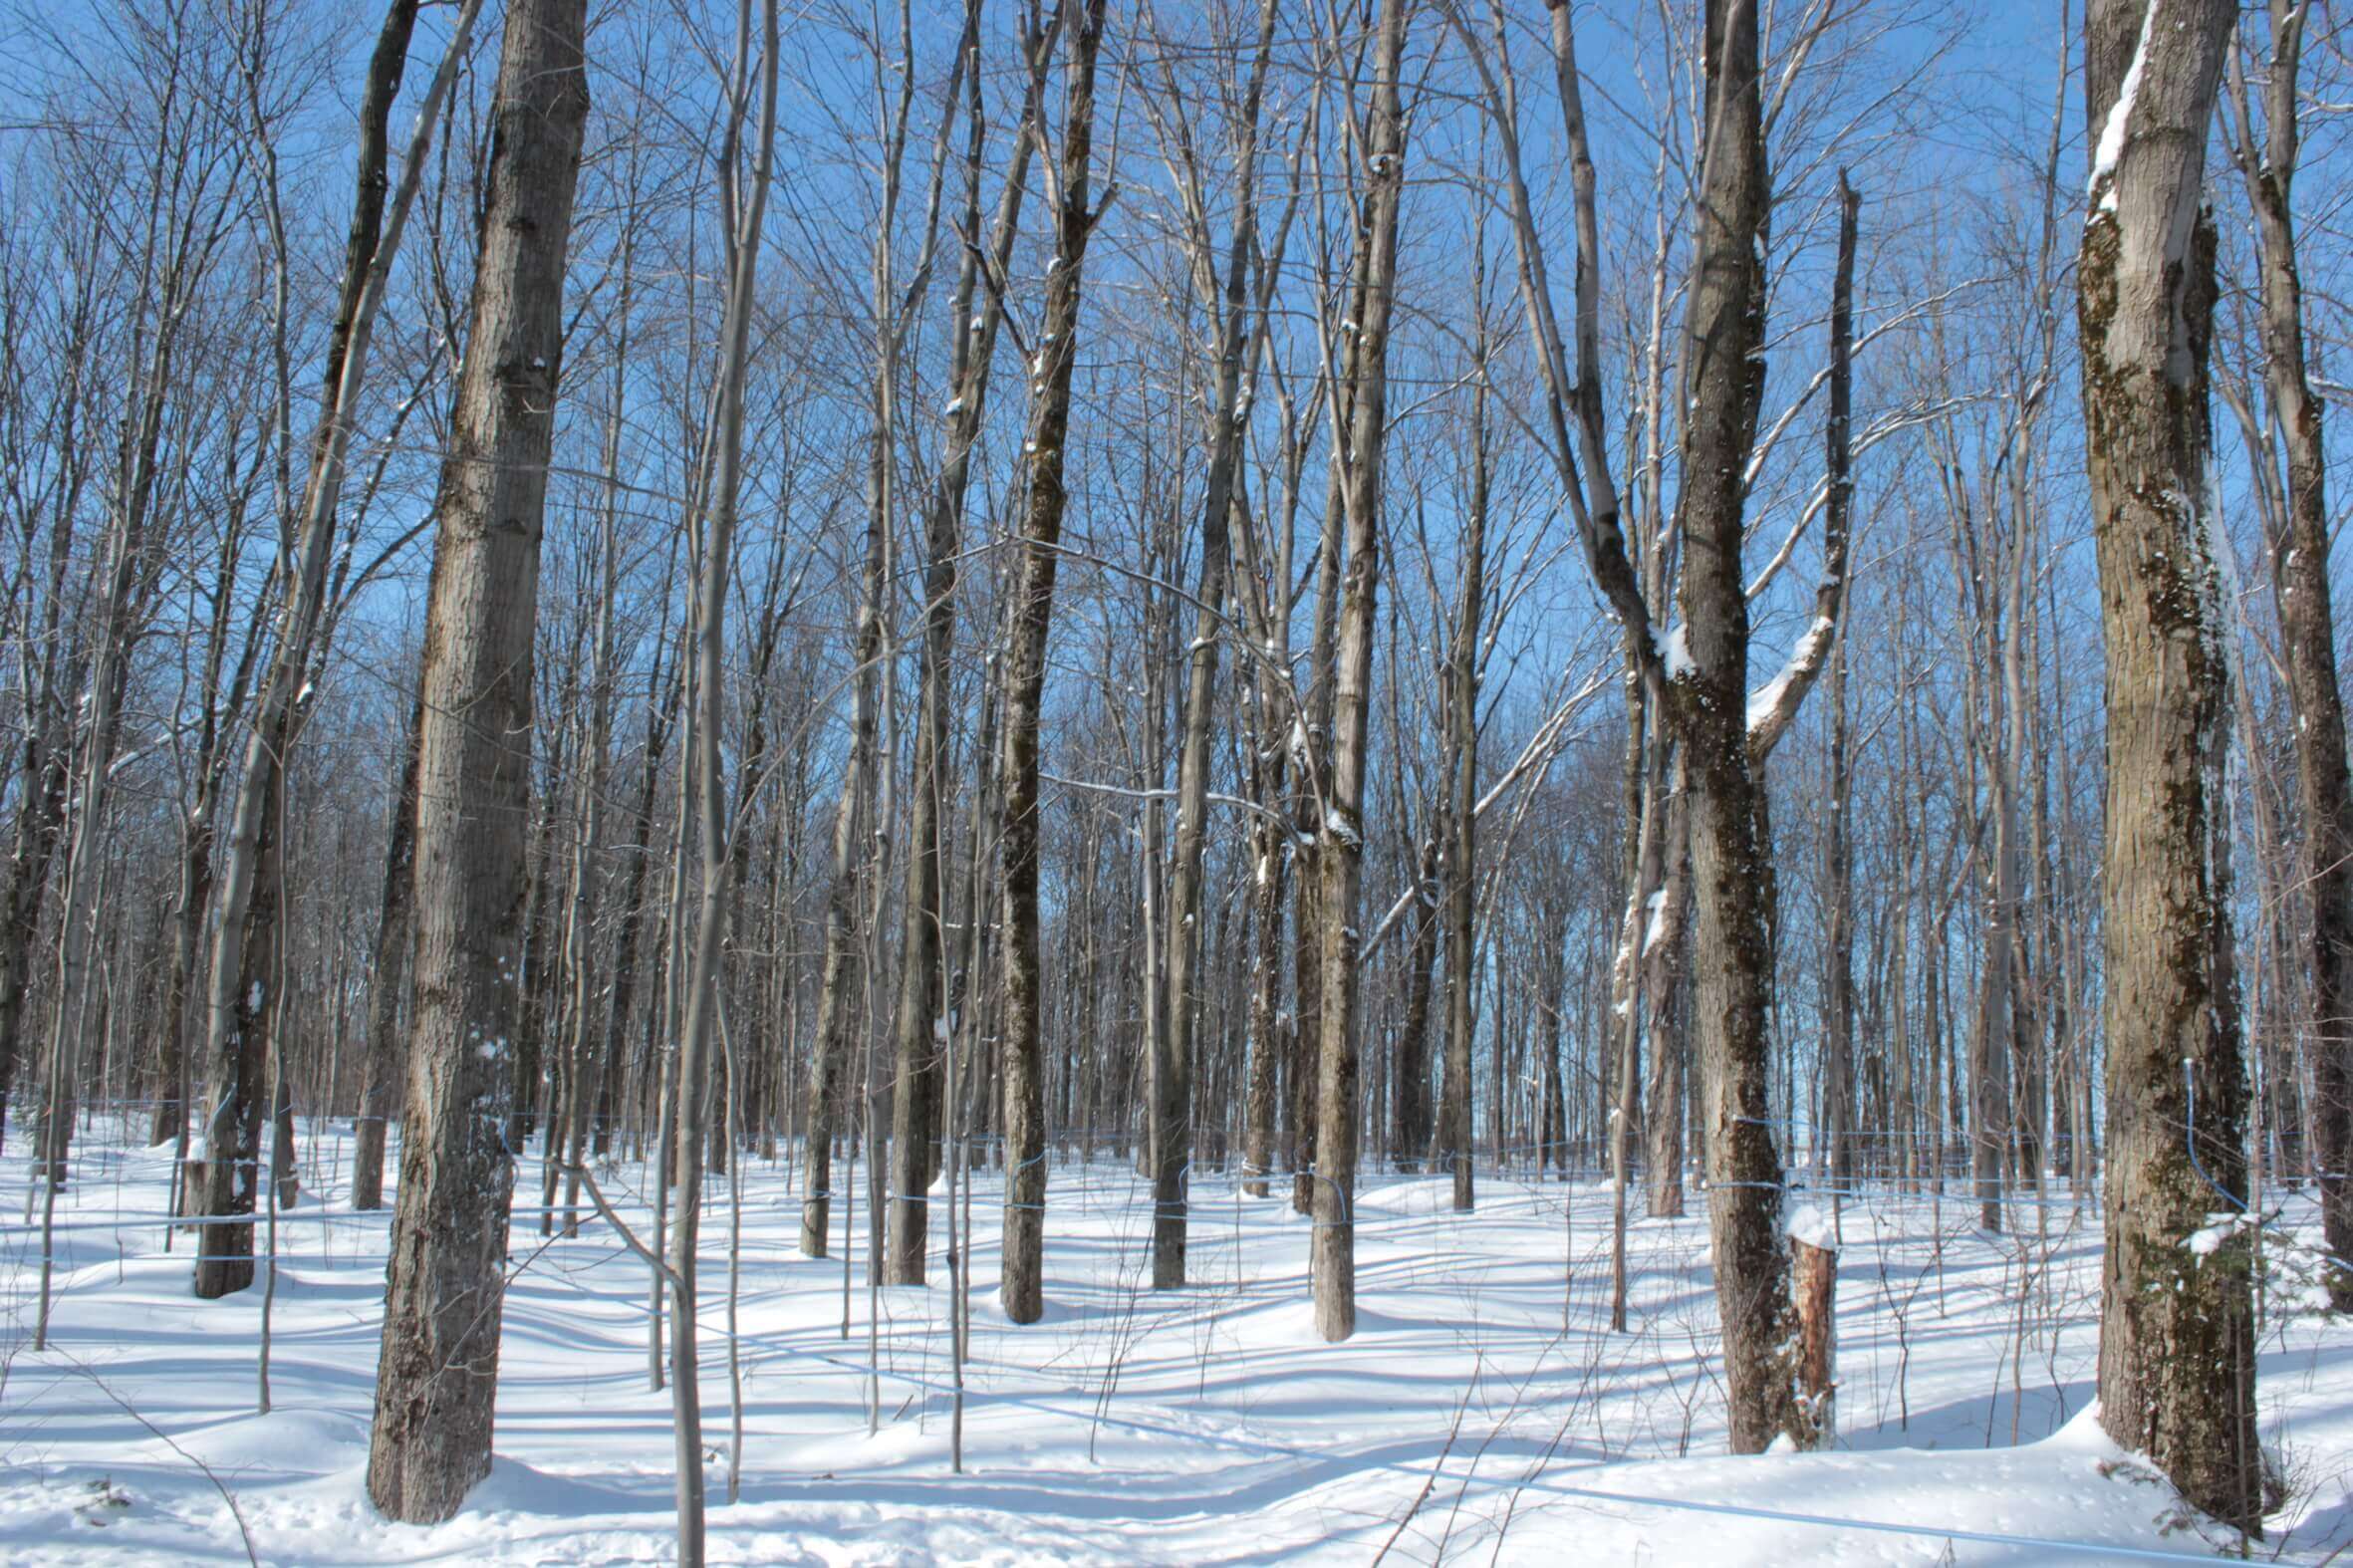 Quebec's maple forest